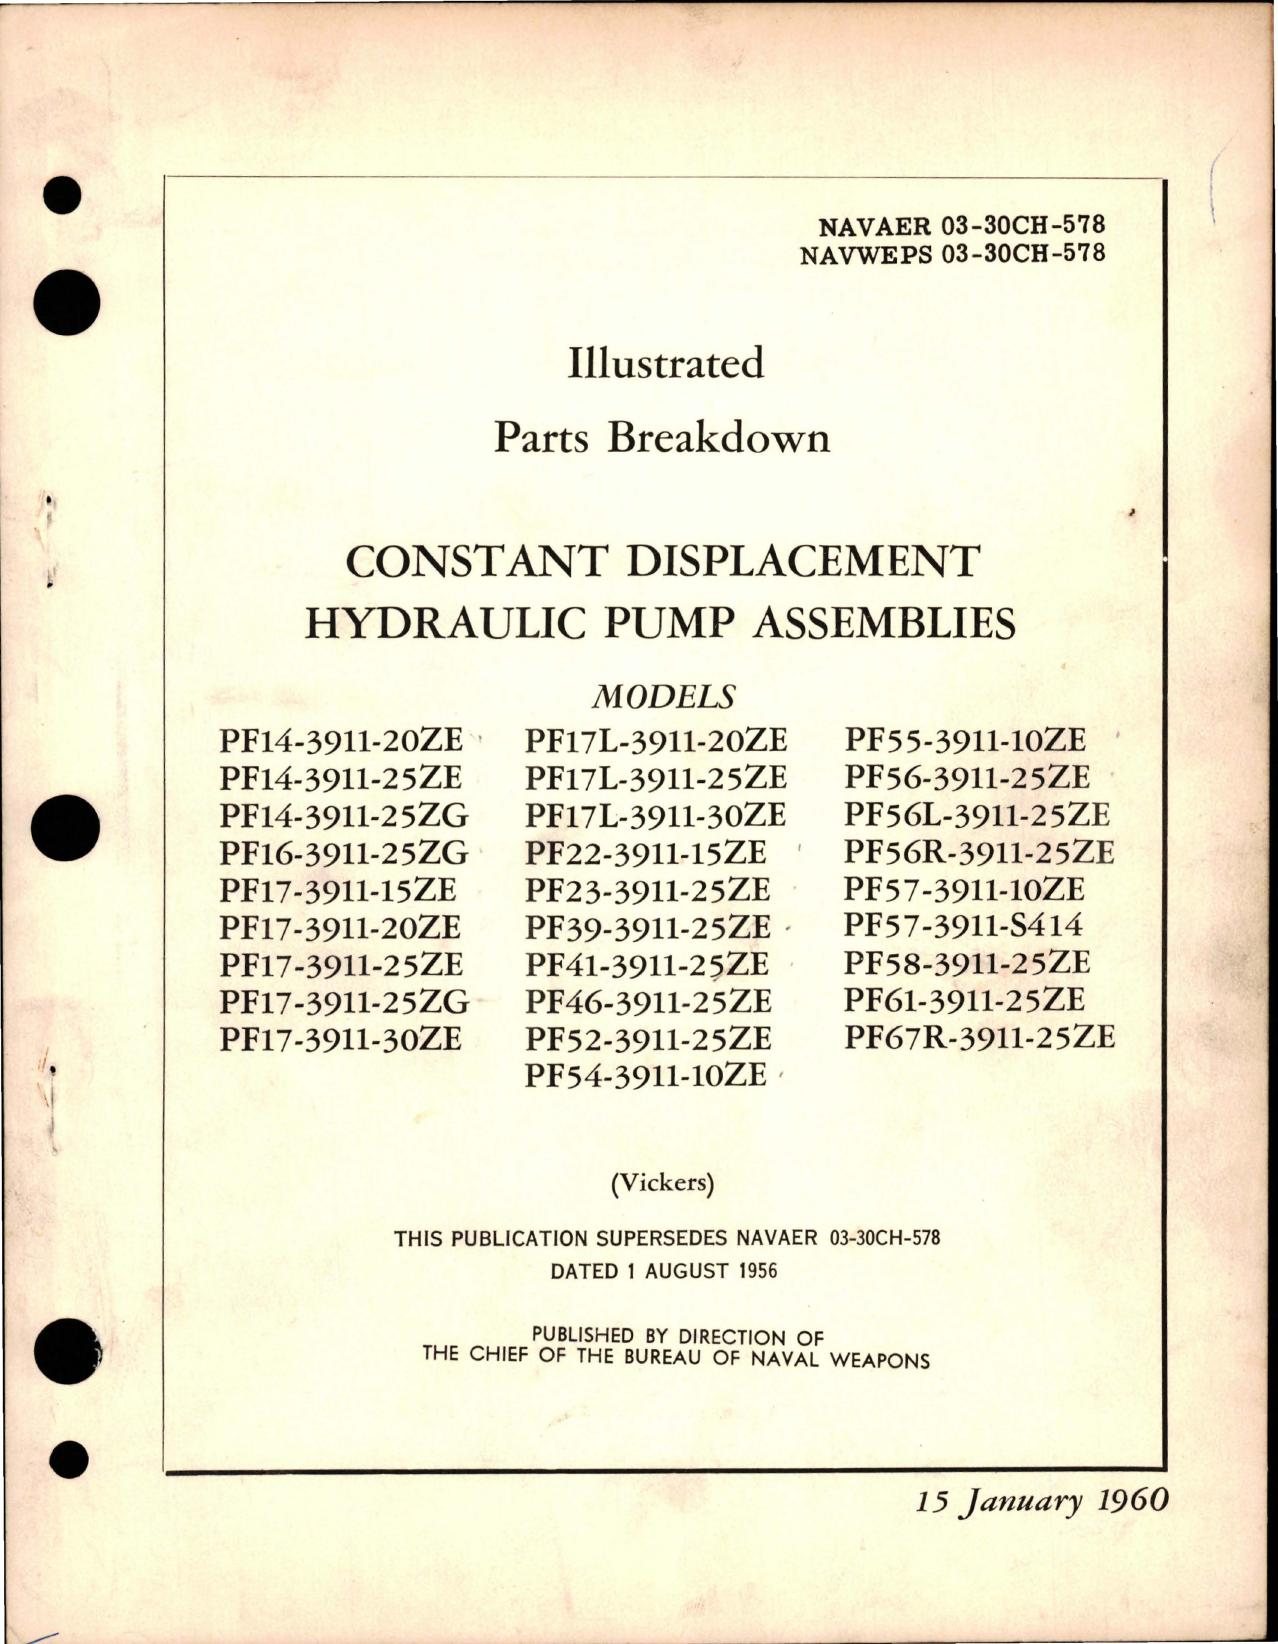 Sample page 1 from AirCorps Library document: Illustrated Parts Breakdown for Constant Displacement Hydraulic Pump Assemblies